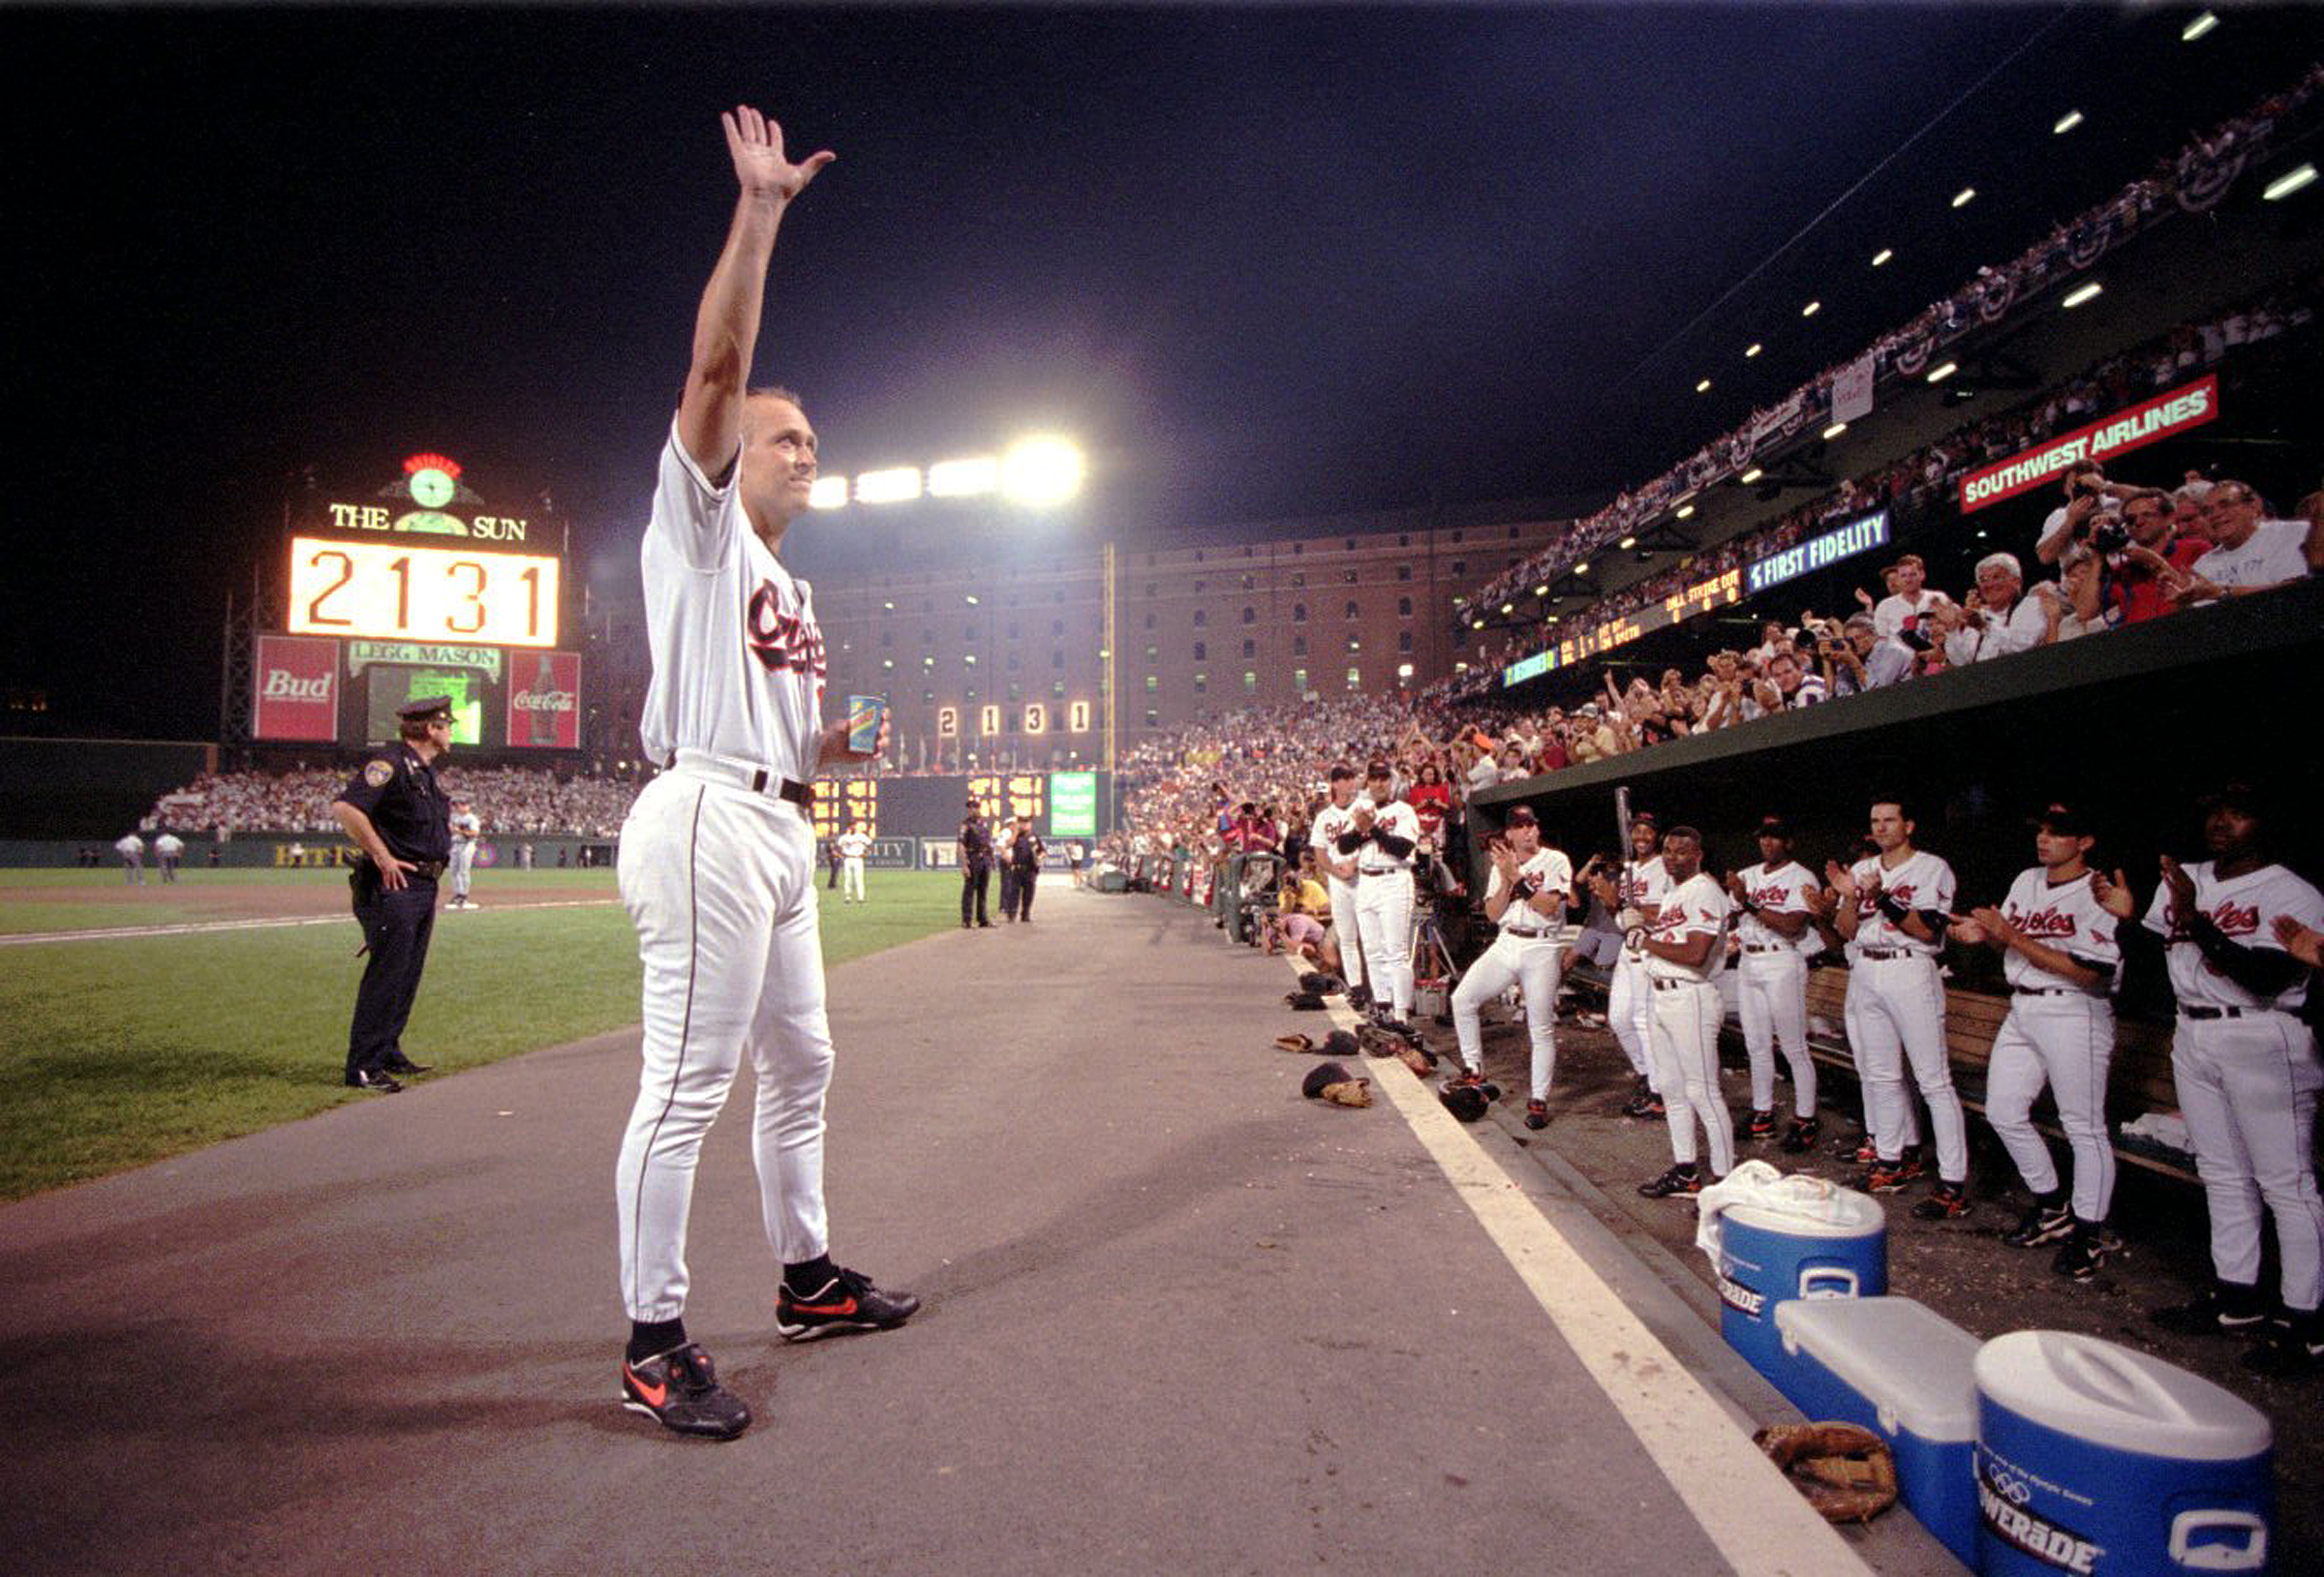 Cal Ripken Jr.: First Pitch 'A Reality Check' About How Much Time Has  Passed Since 2,131 - PressBox